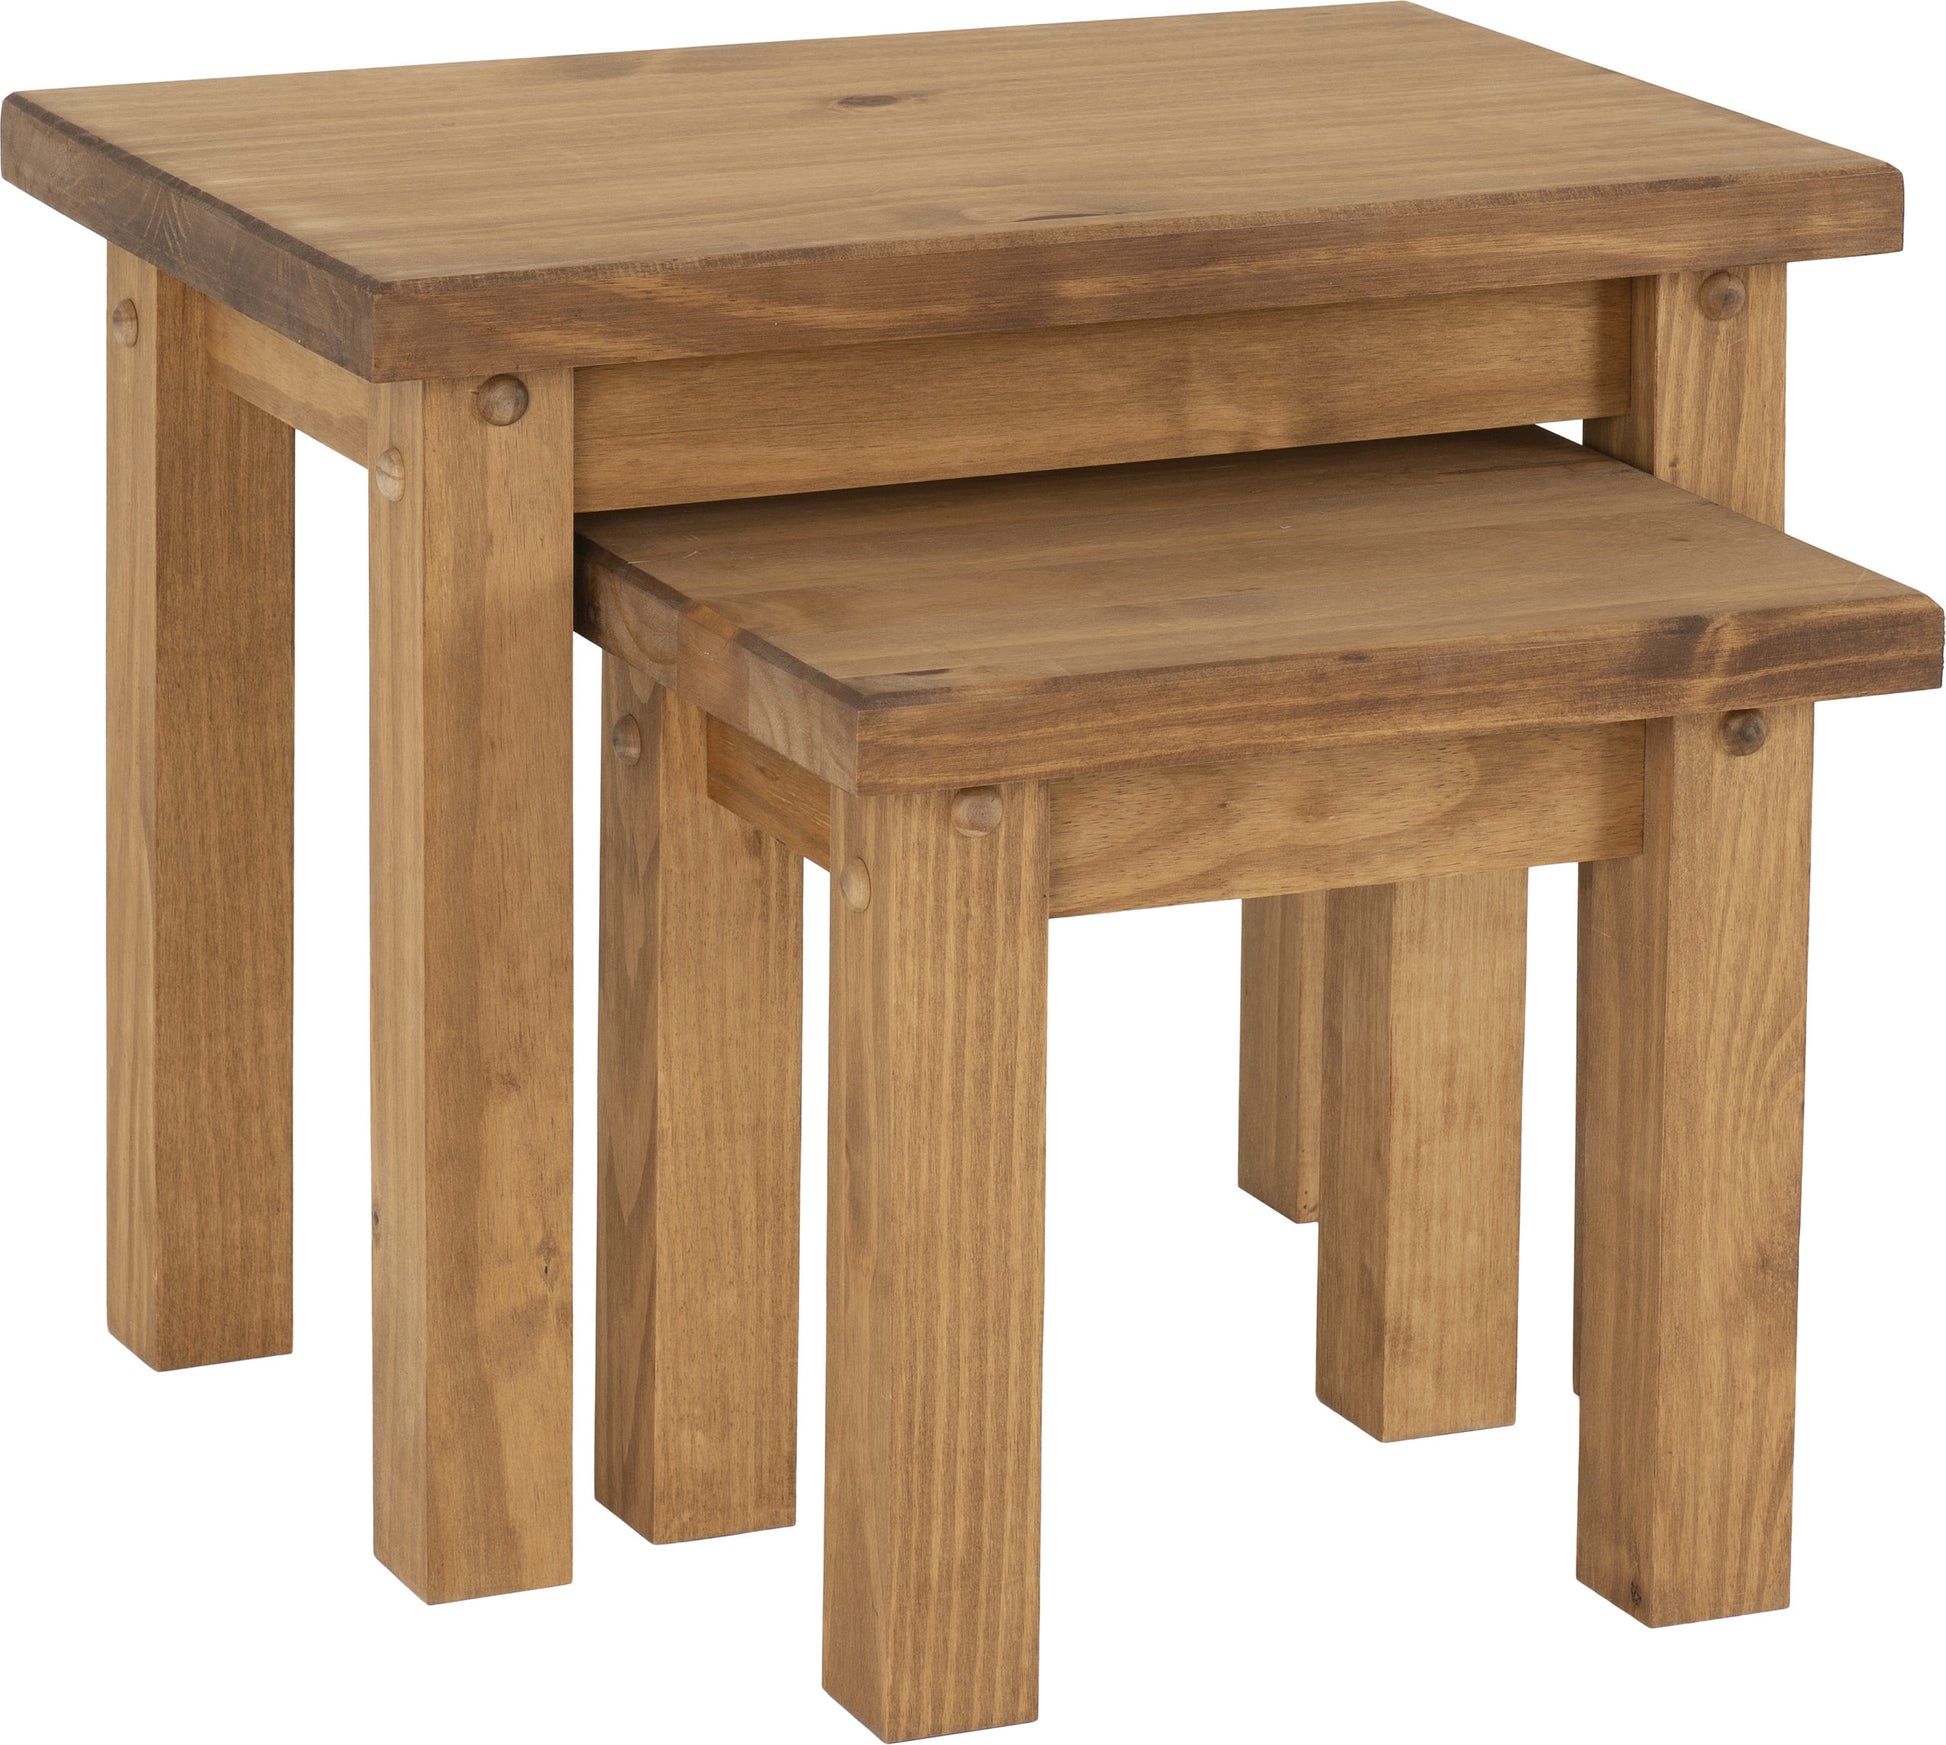 TORTILLA-NEST-OF-2-TABLES-DISTRESSED-WAXED-PINE-2020-300-303-017-01-scaled.jpg